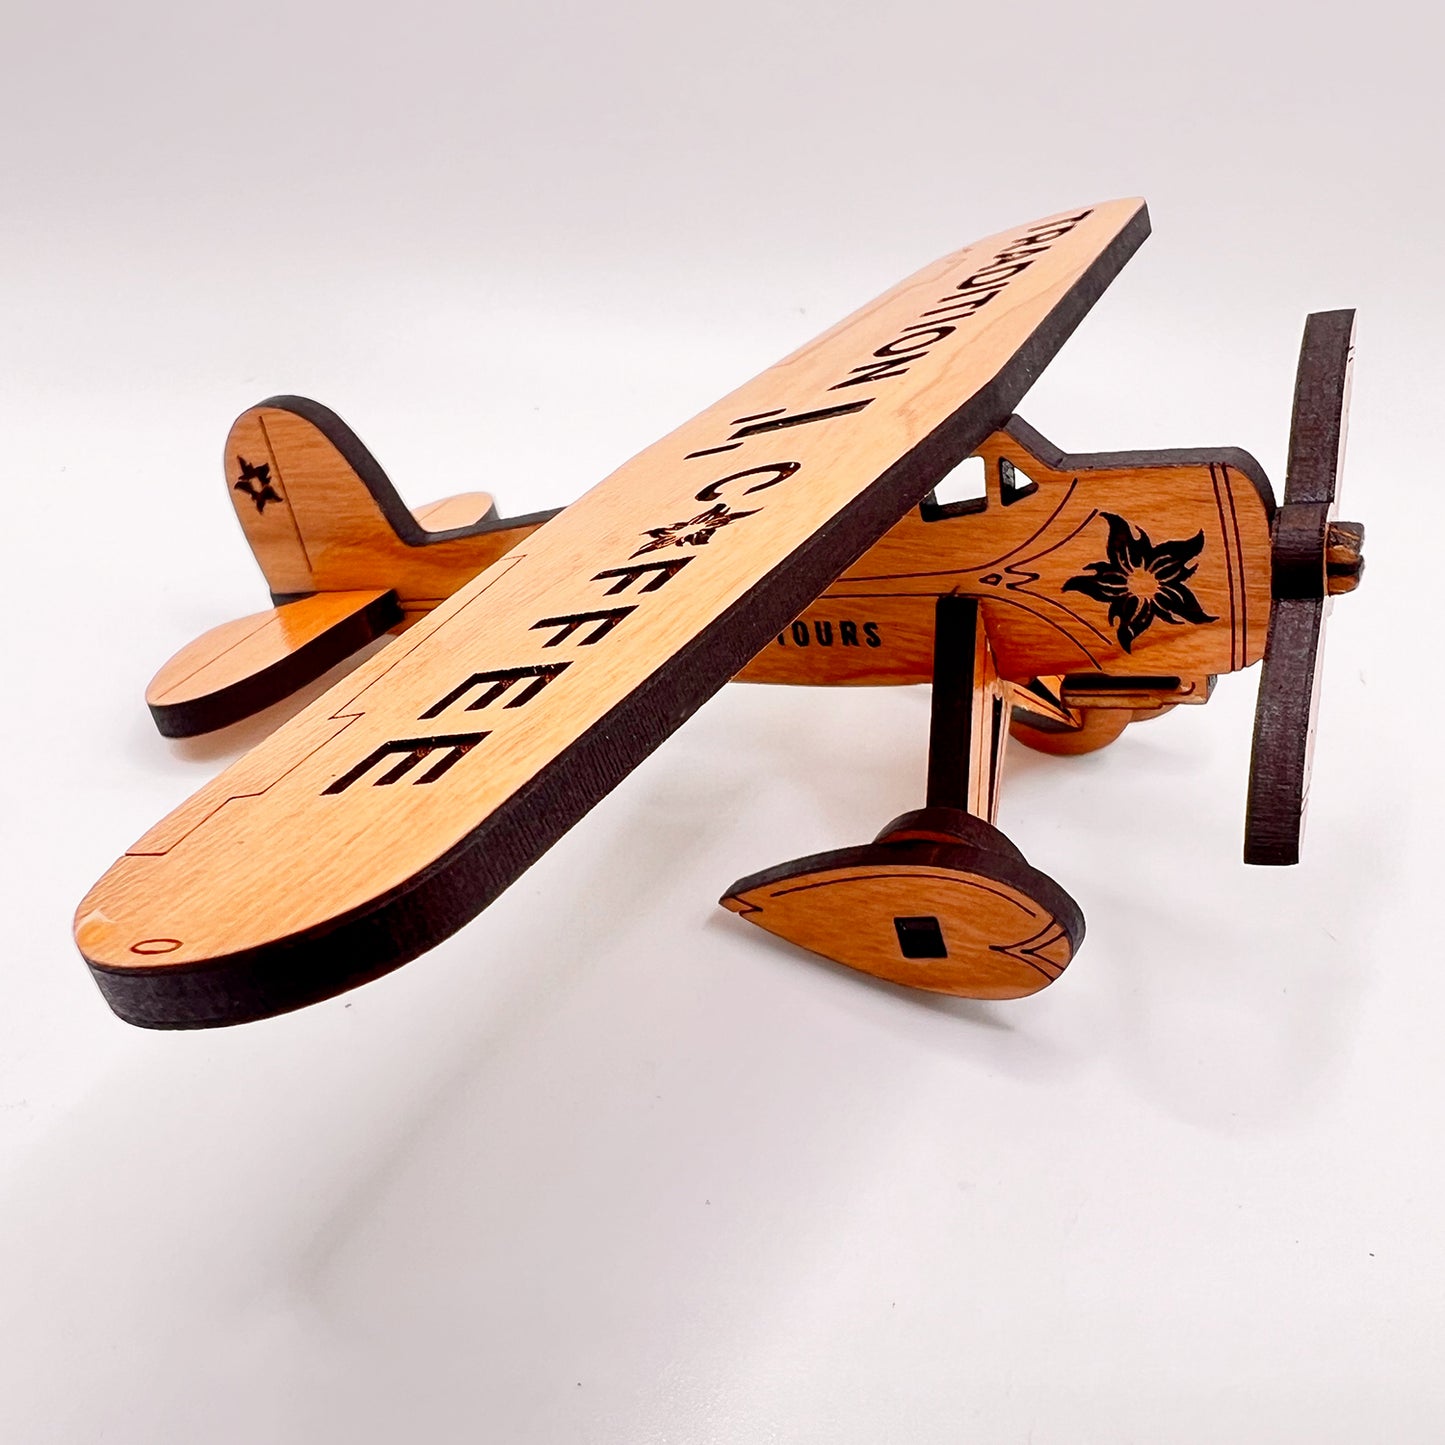 Personalized Airplane Model - Women in Aviation